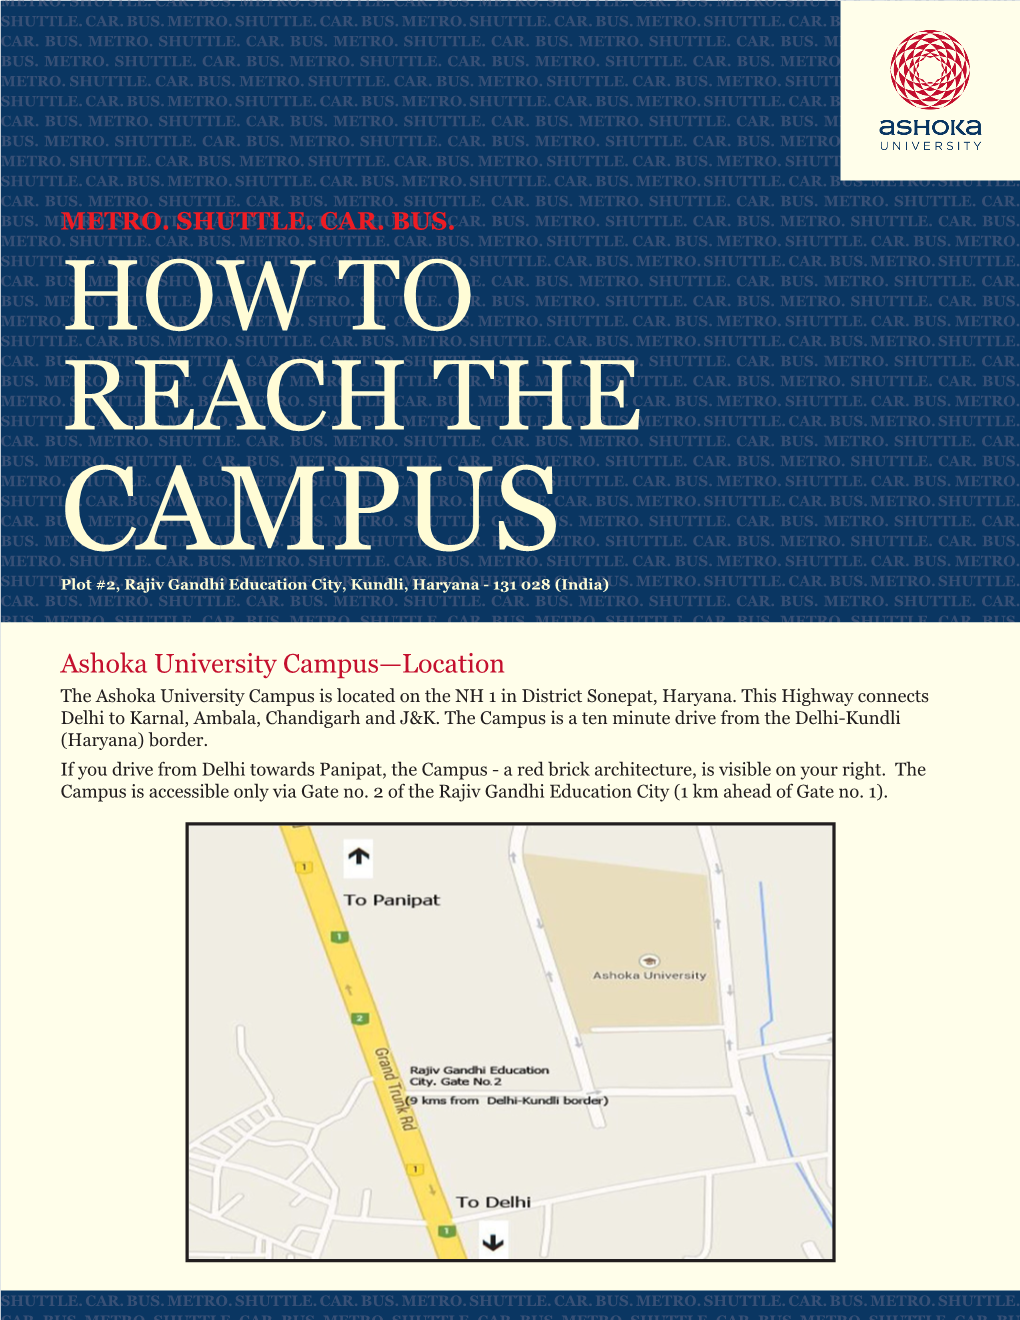 How to Reach the Campus